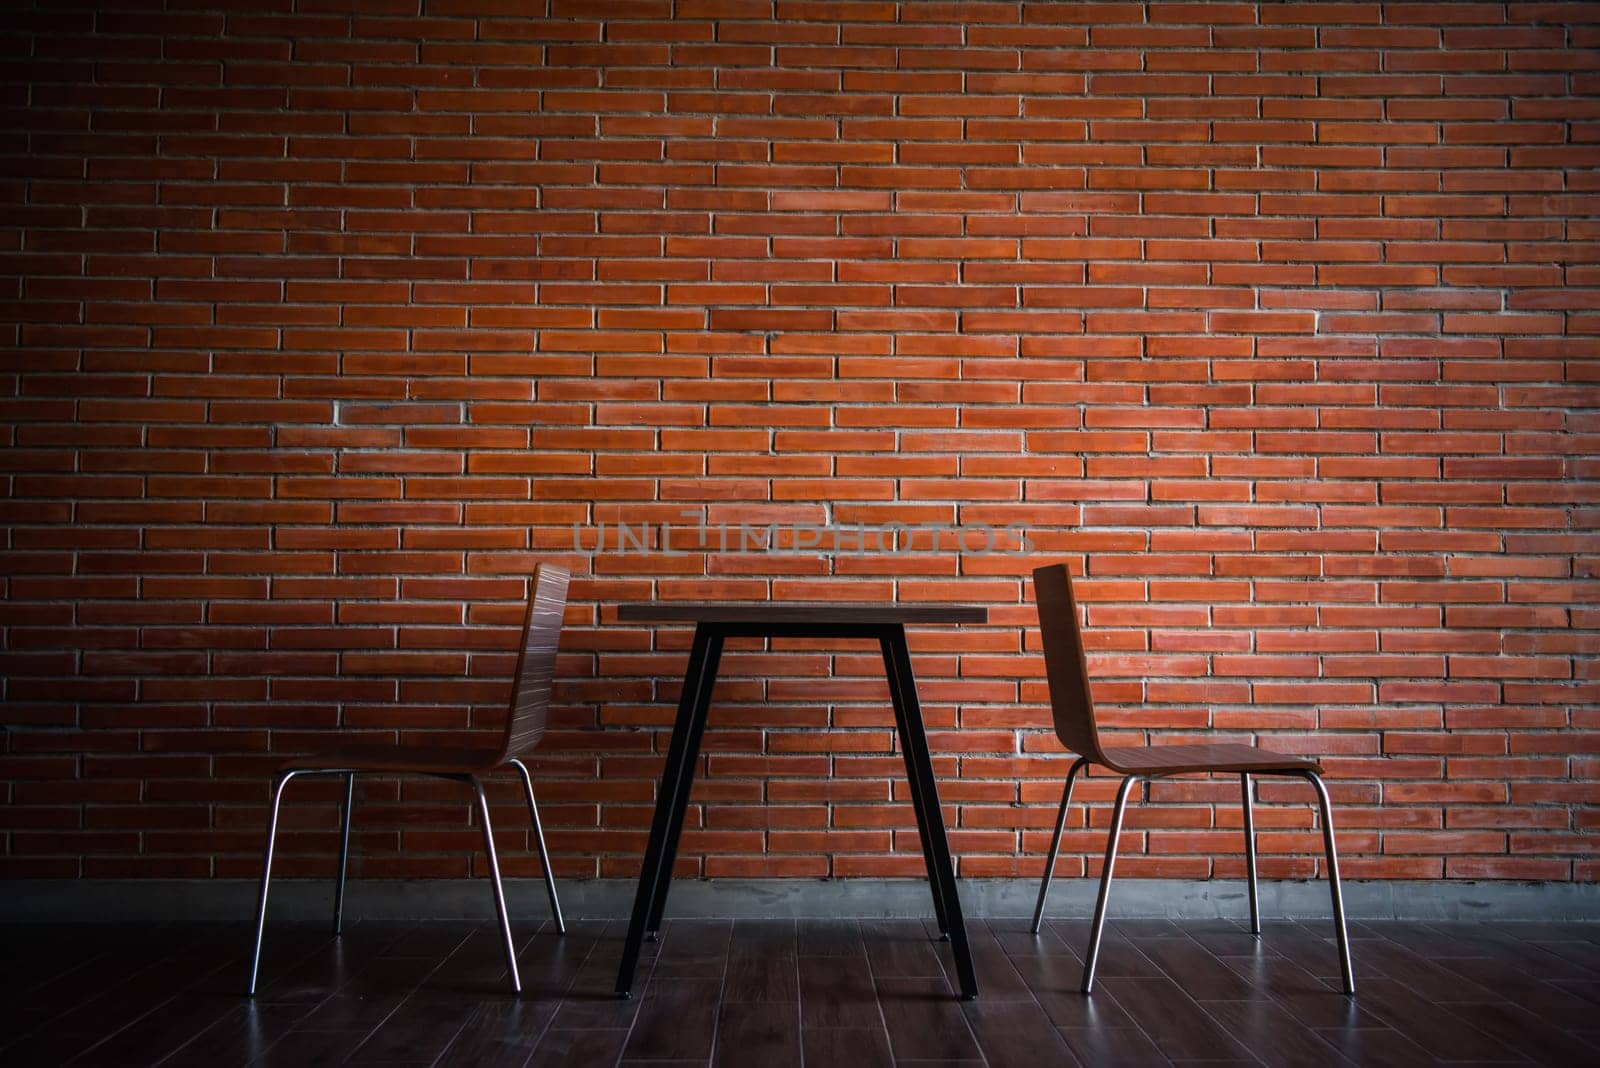 Cafe or restaurant in balcony view decorate with red brick wall and table chairs set for seating relax